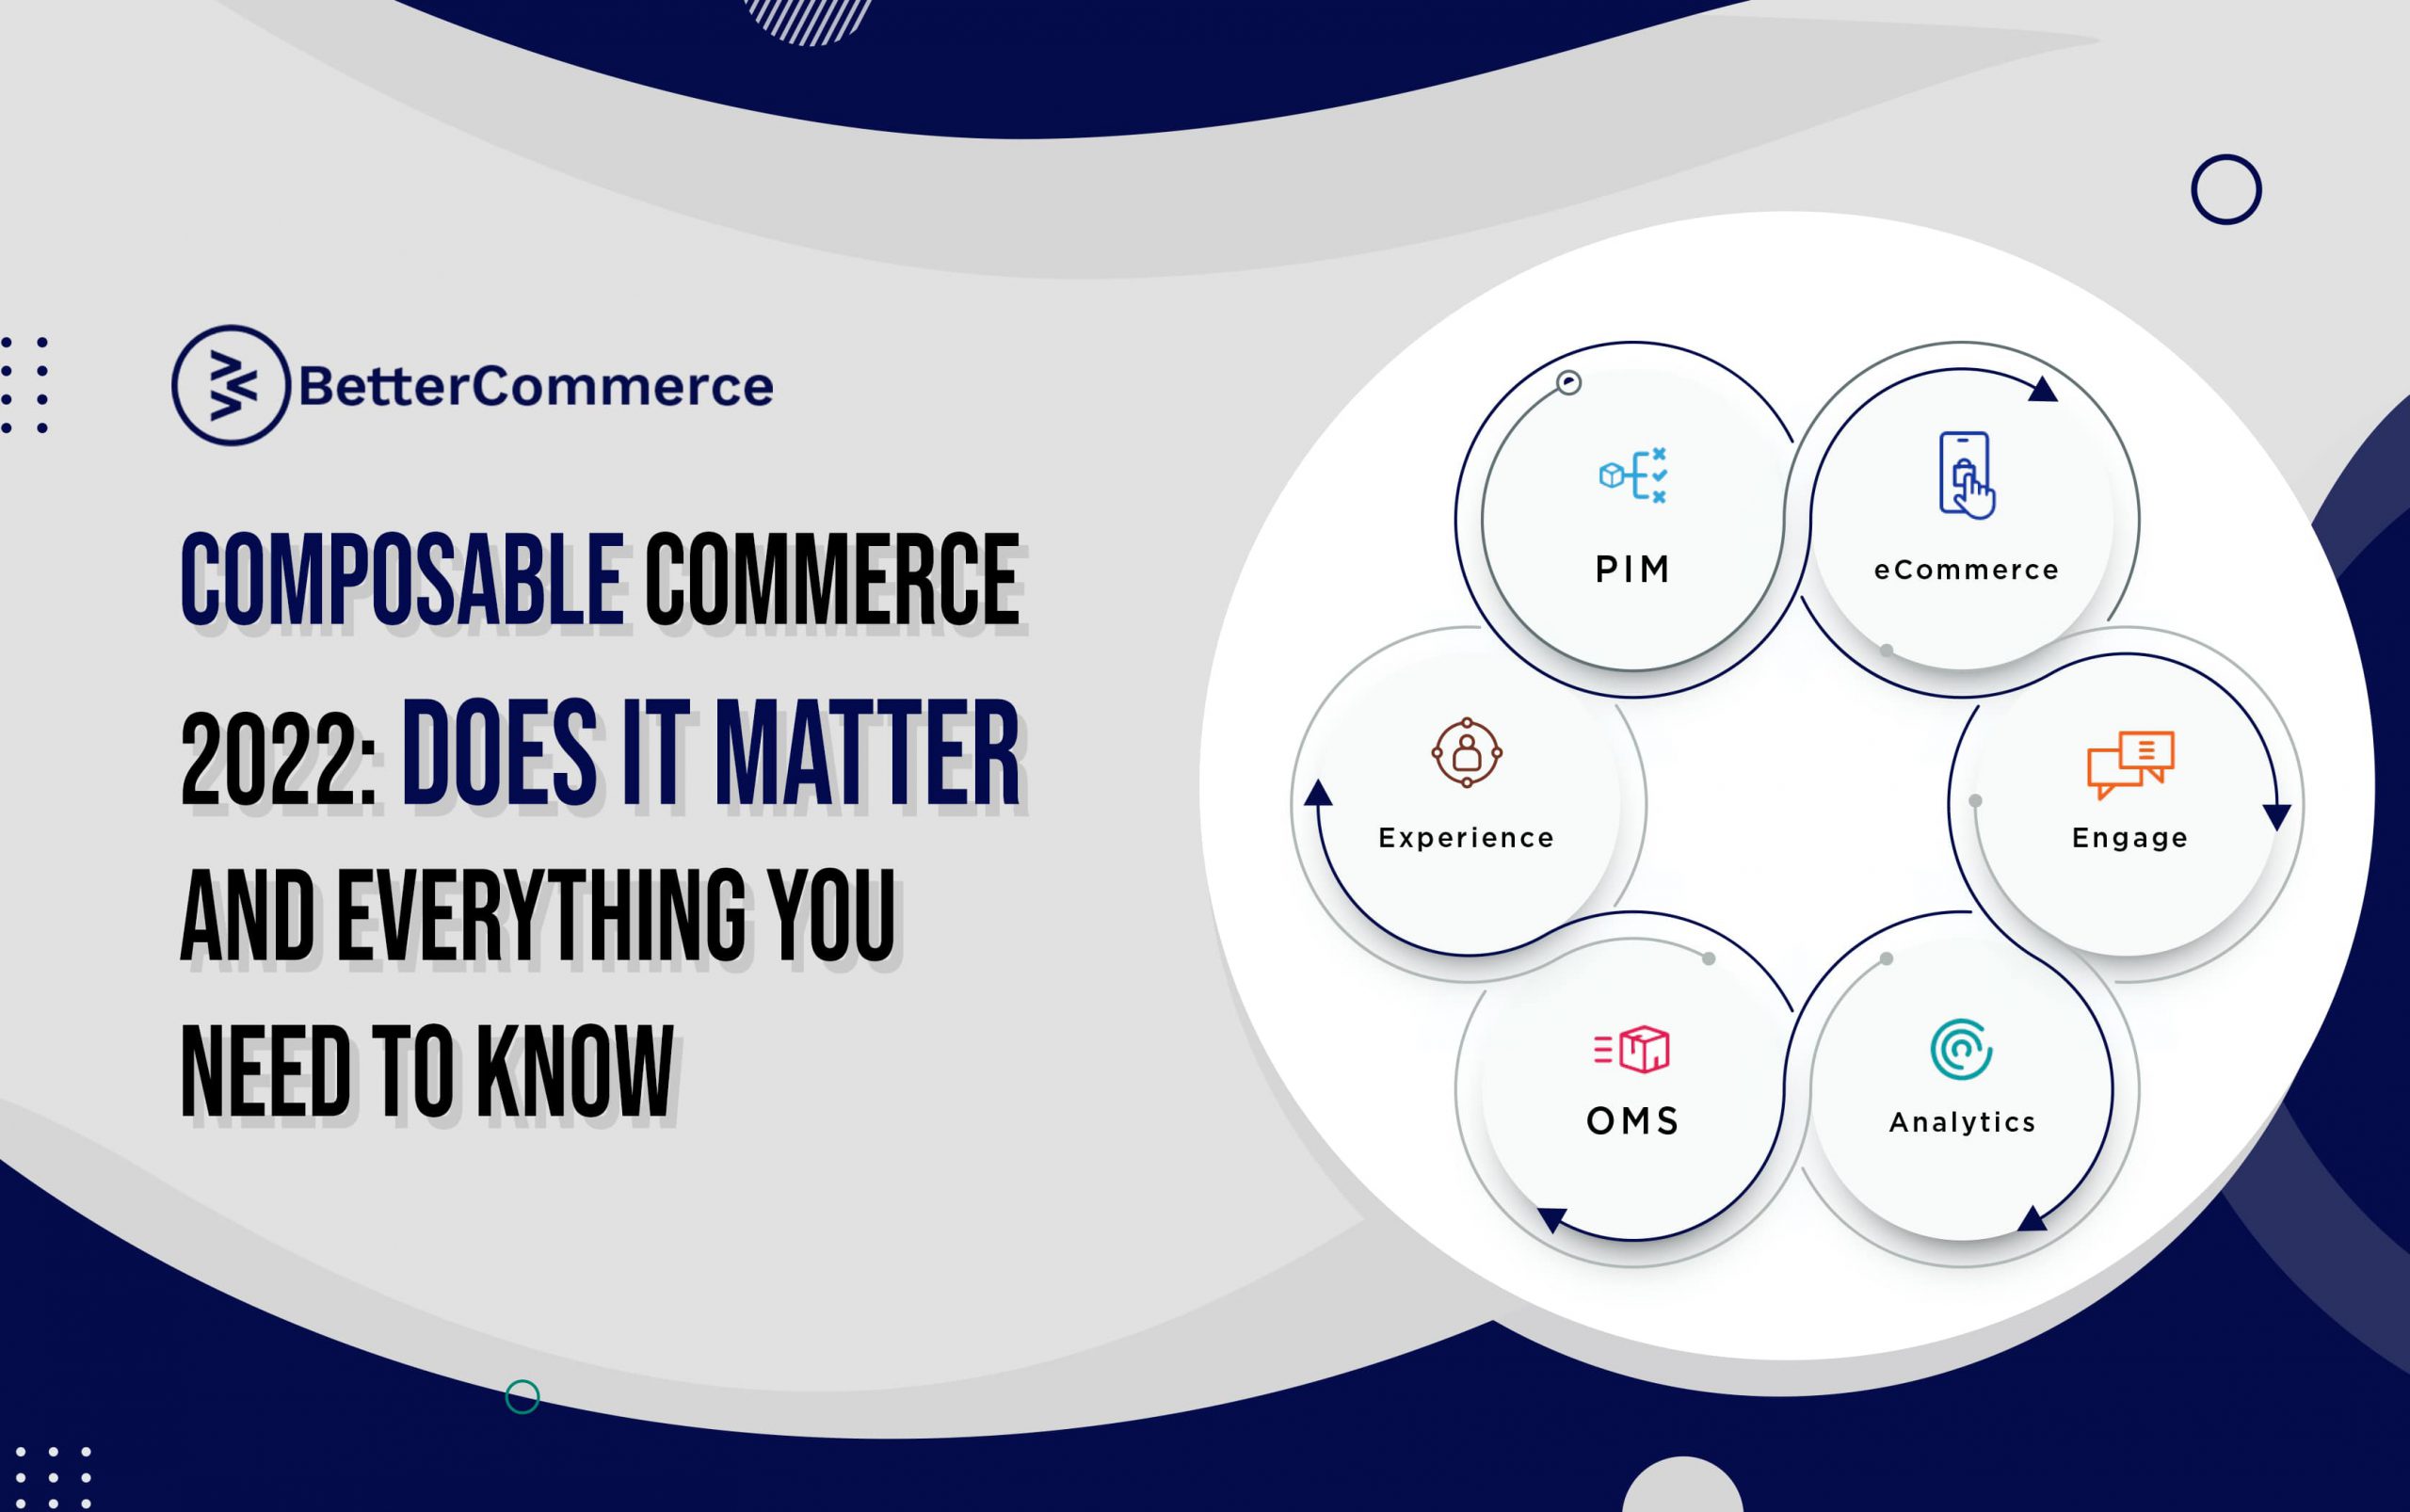 Composable Commerce 2022: Does it matter and Everything you need to know